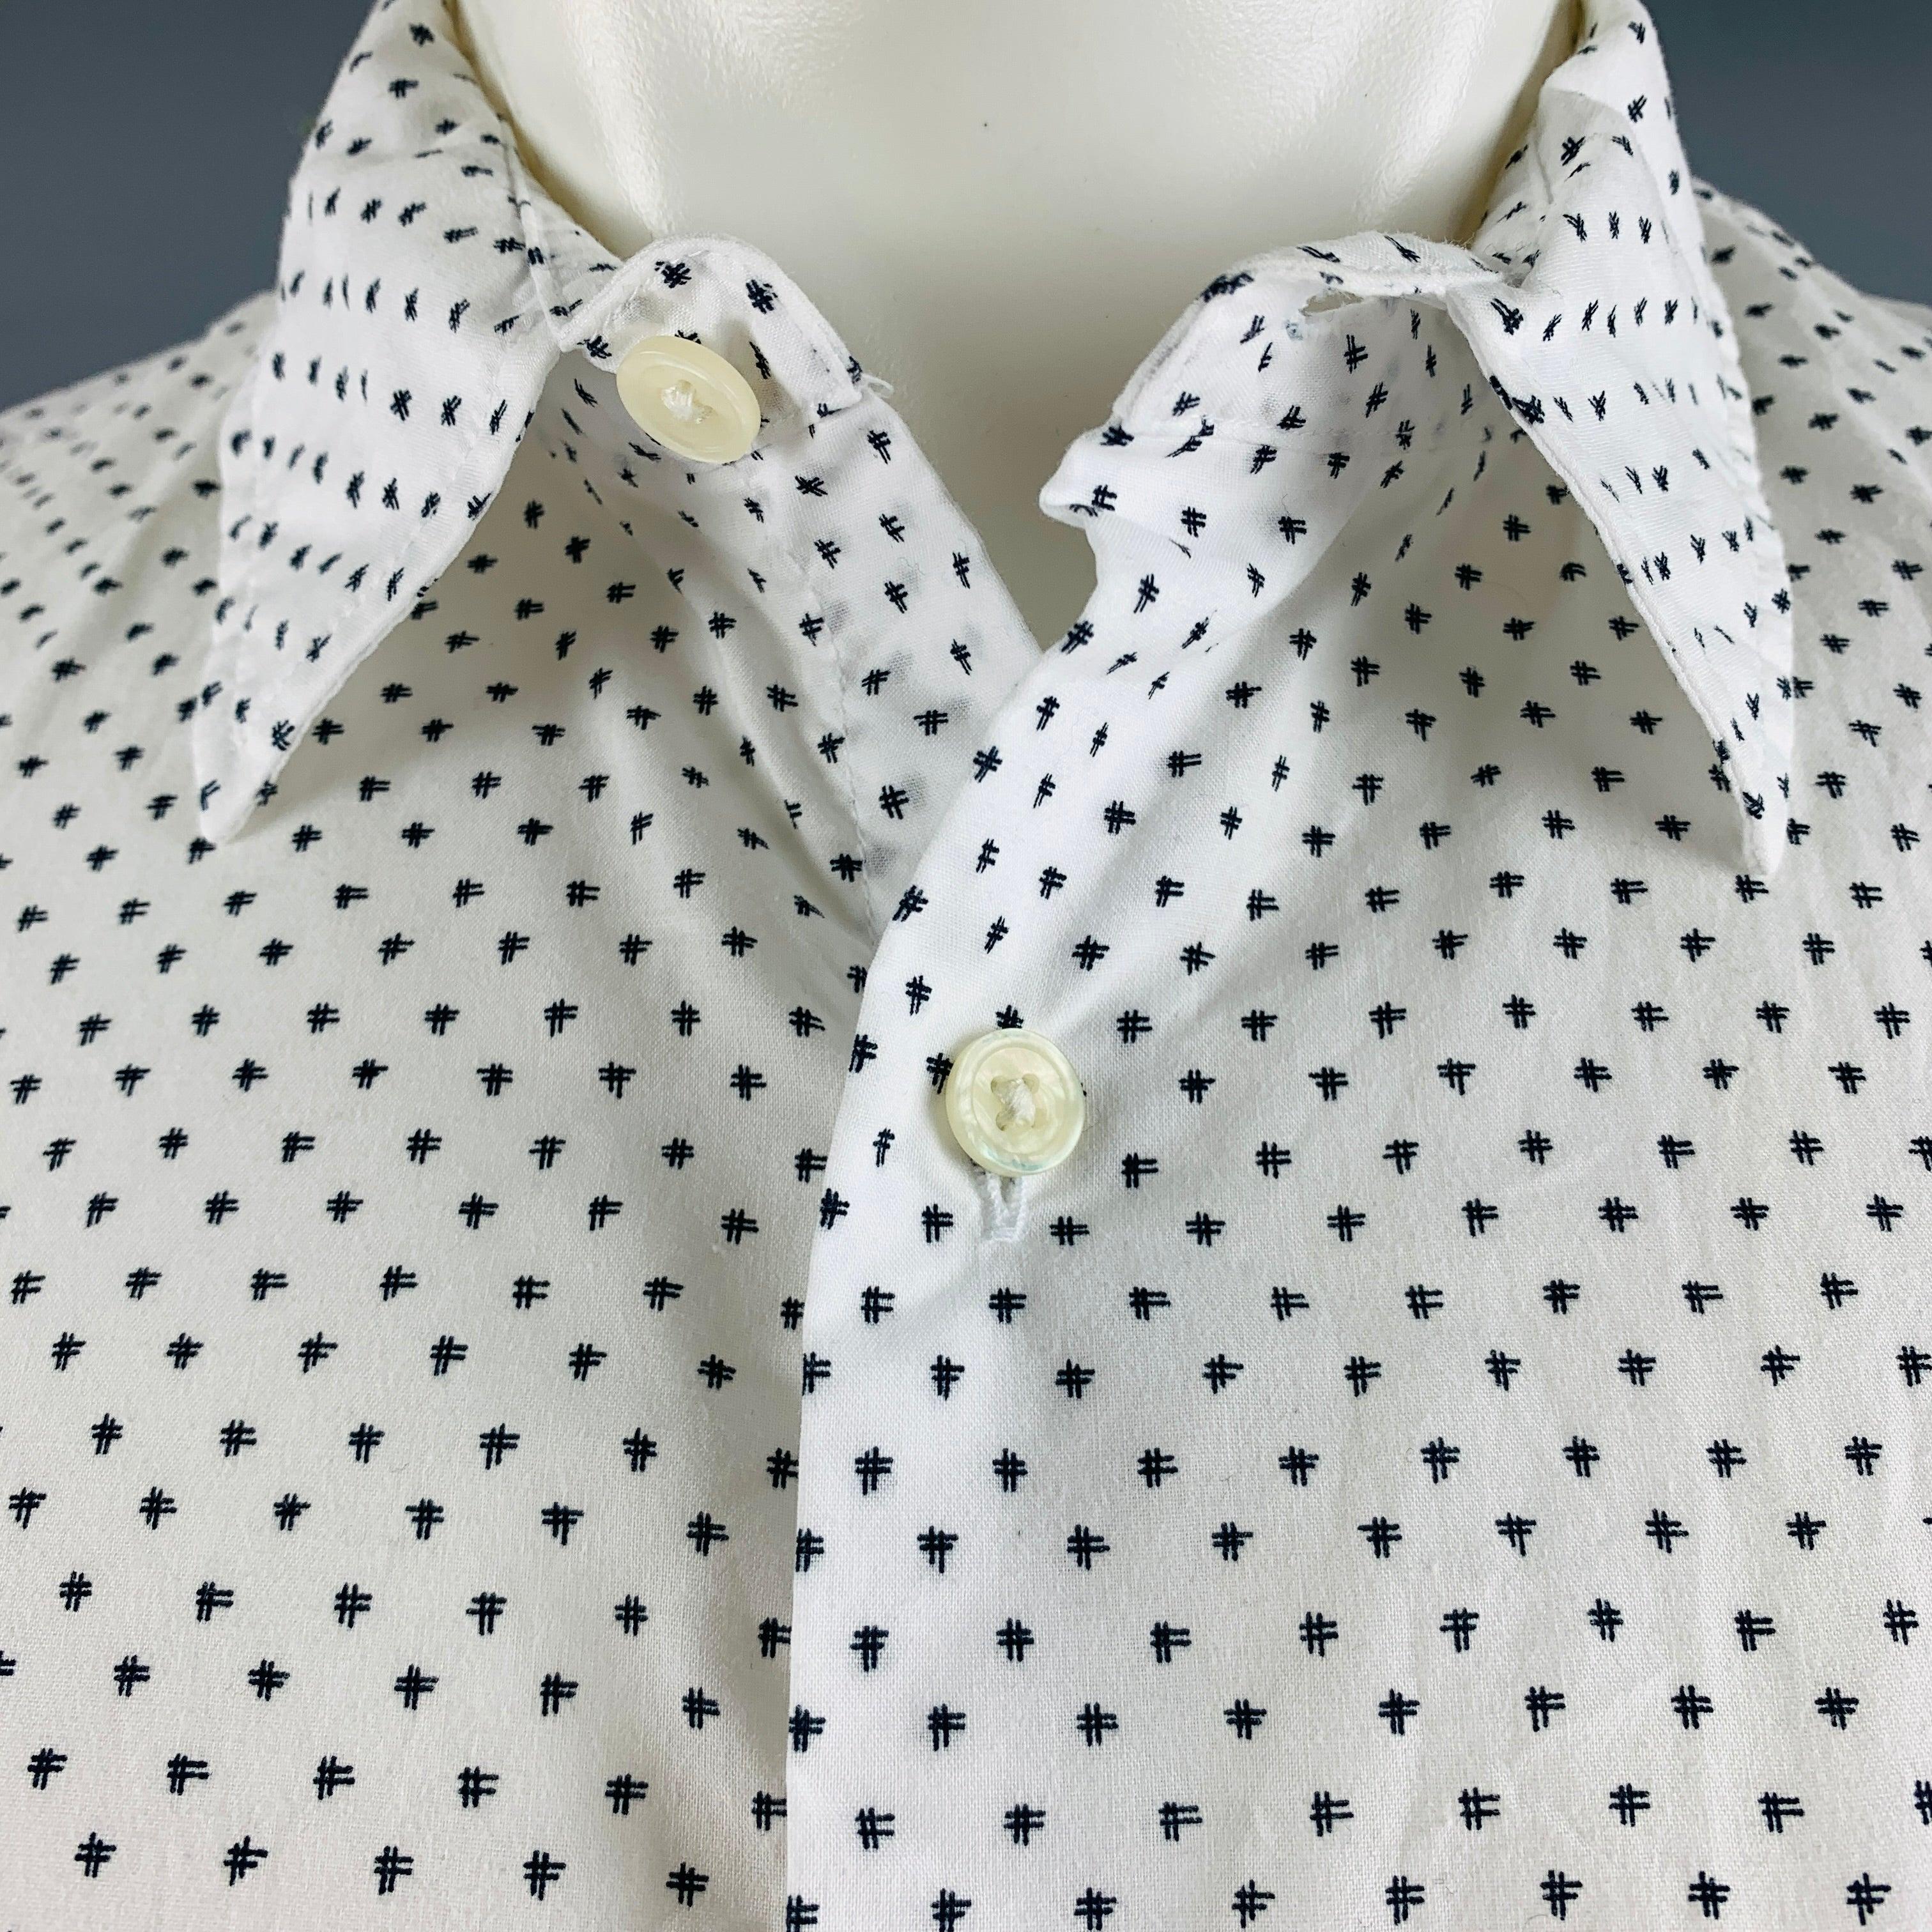 VINCE short sleeve shirt comes in a black and white abstract printed cotton blend woven material featuring one pocket, straight collar, classic fit, and button closure.Excellent Pre-Owned Condition. 

Marked:   M 

Measurements: 
 
Shoulder: 17